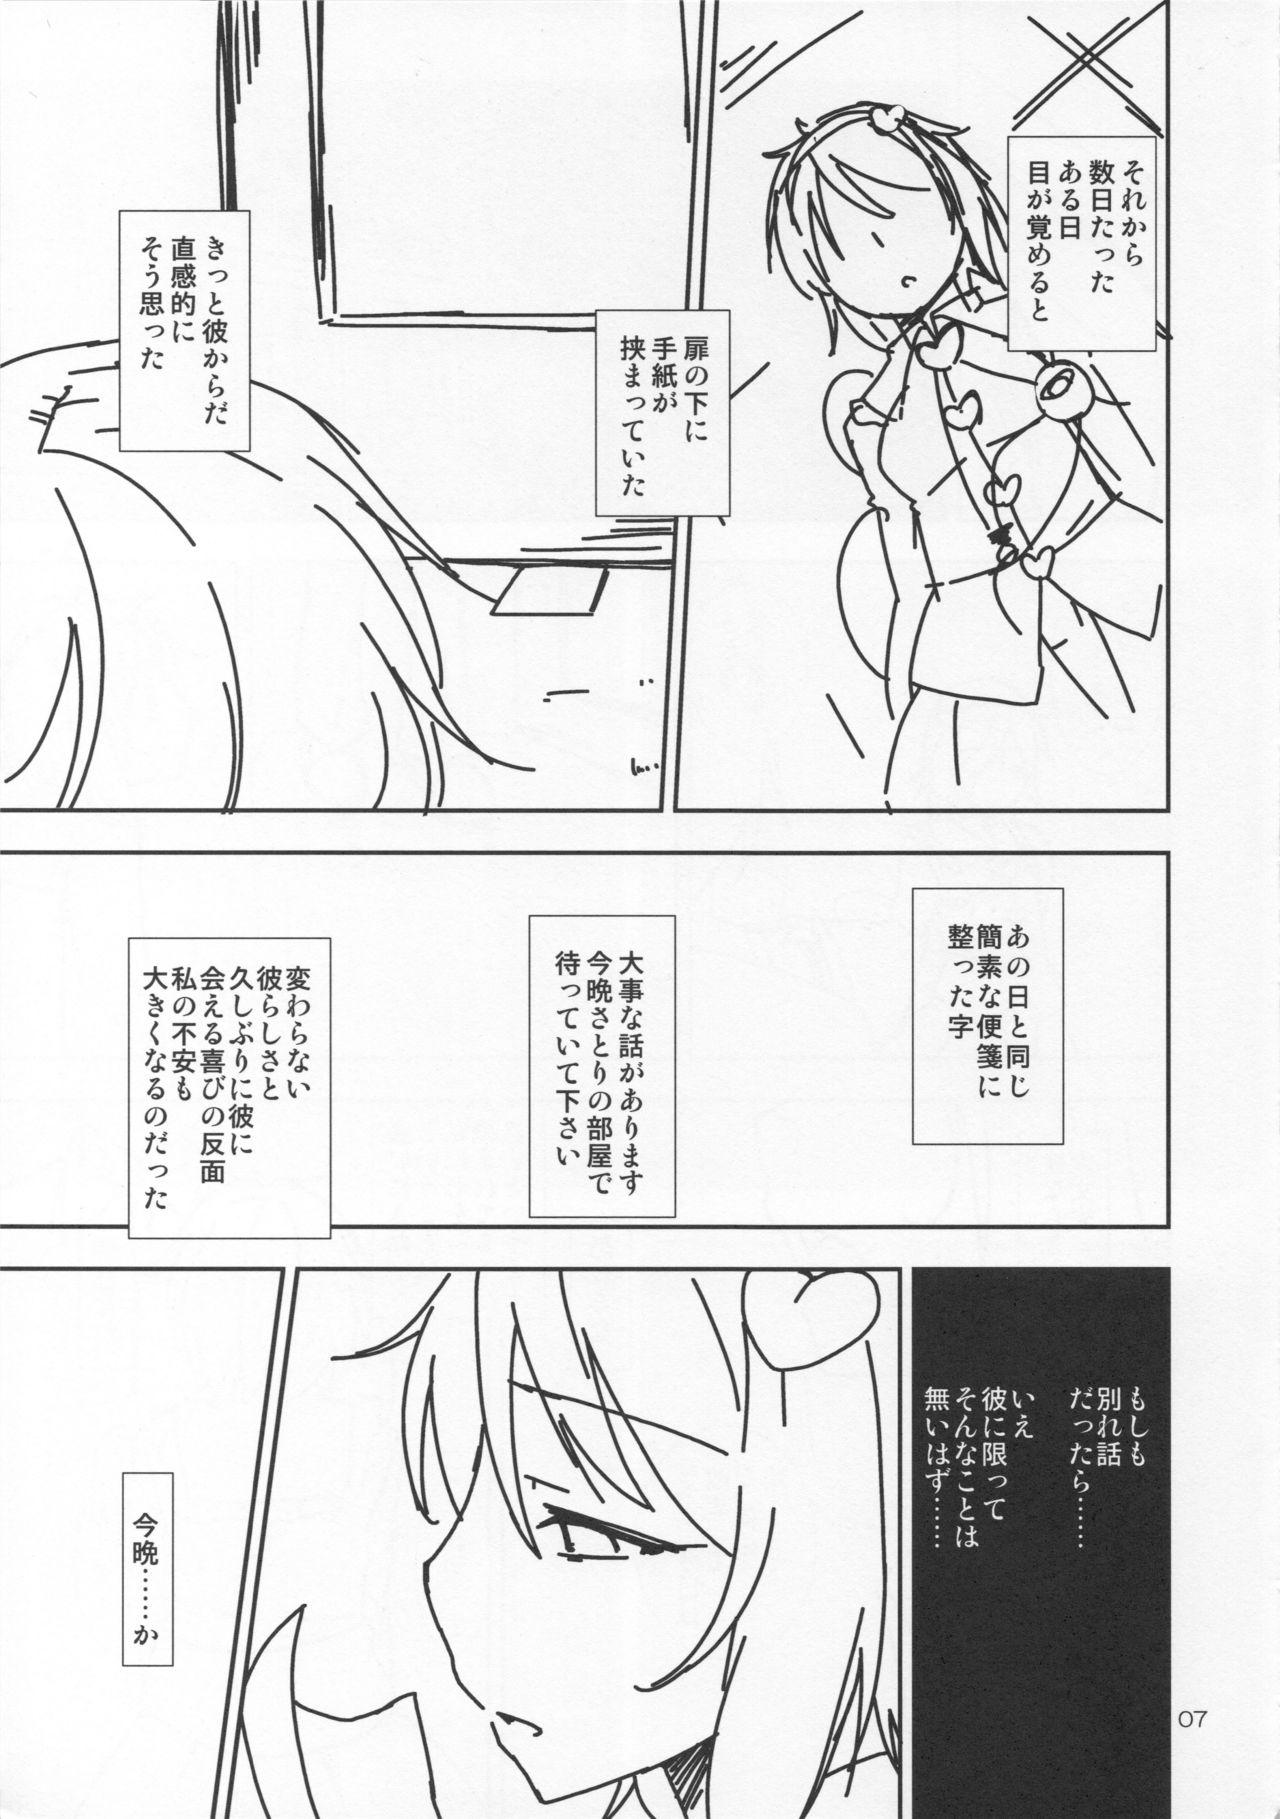 Costume Urakoi 5 Preview Ban - Touhou project Emo - Page 6